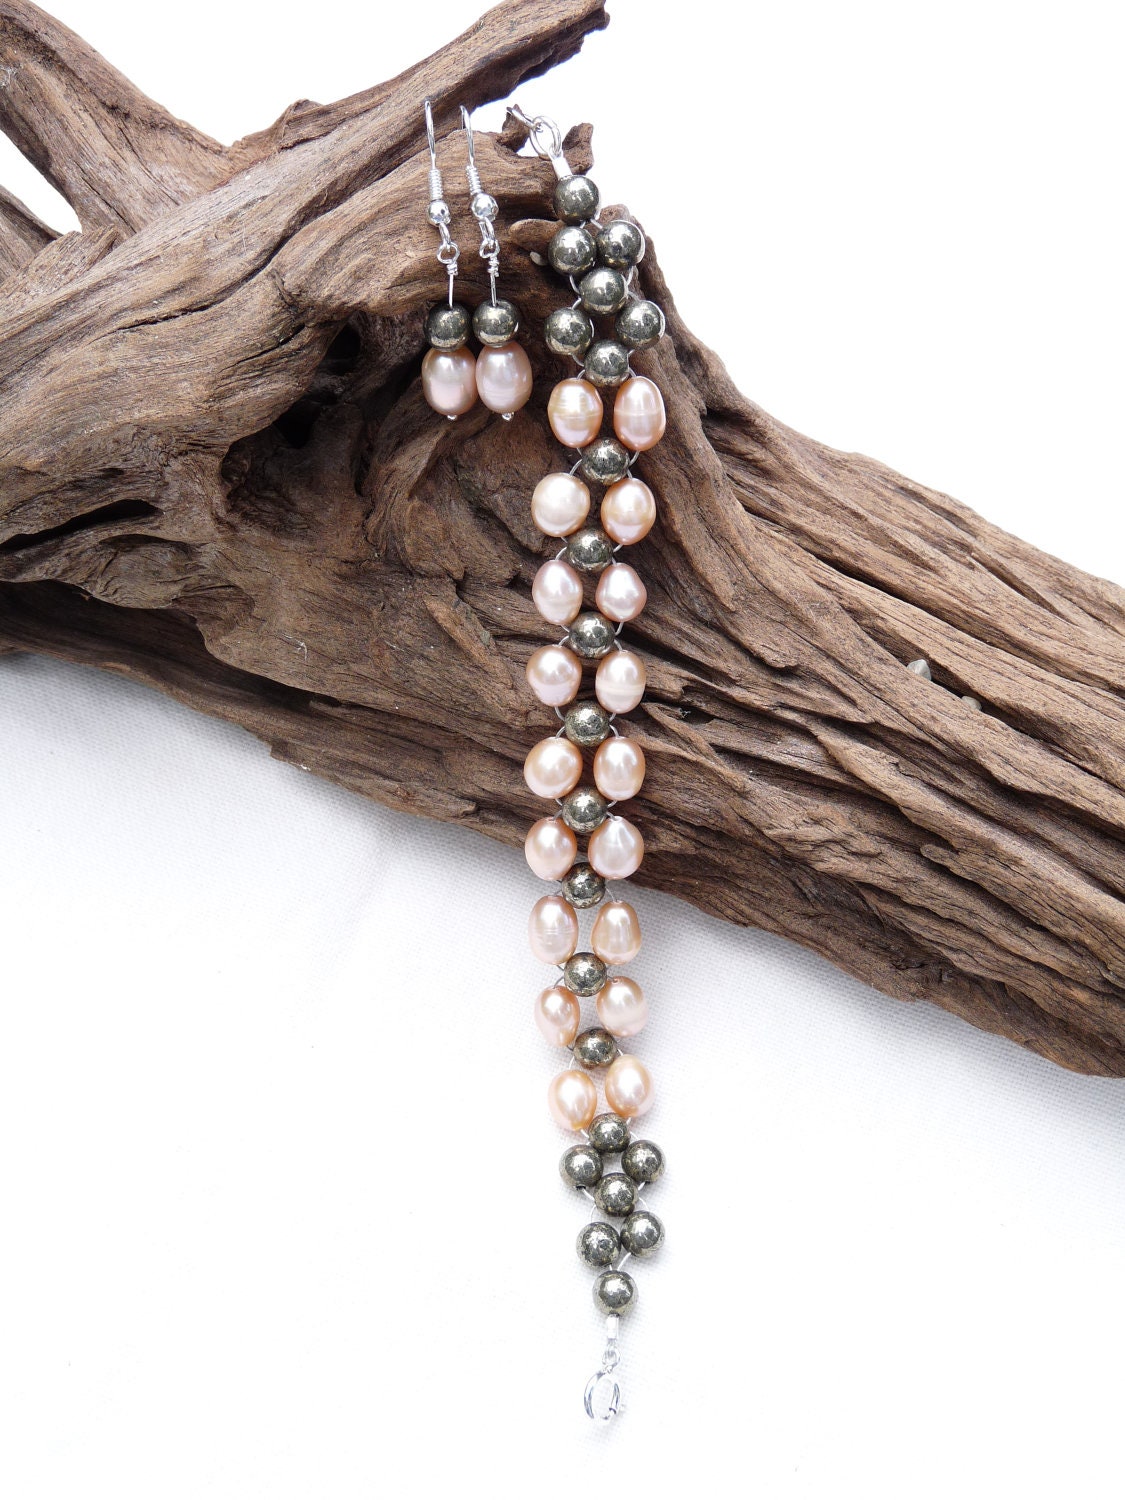 Bracelet and Earrings Set Peach Pearls With Pyrite - Etsy